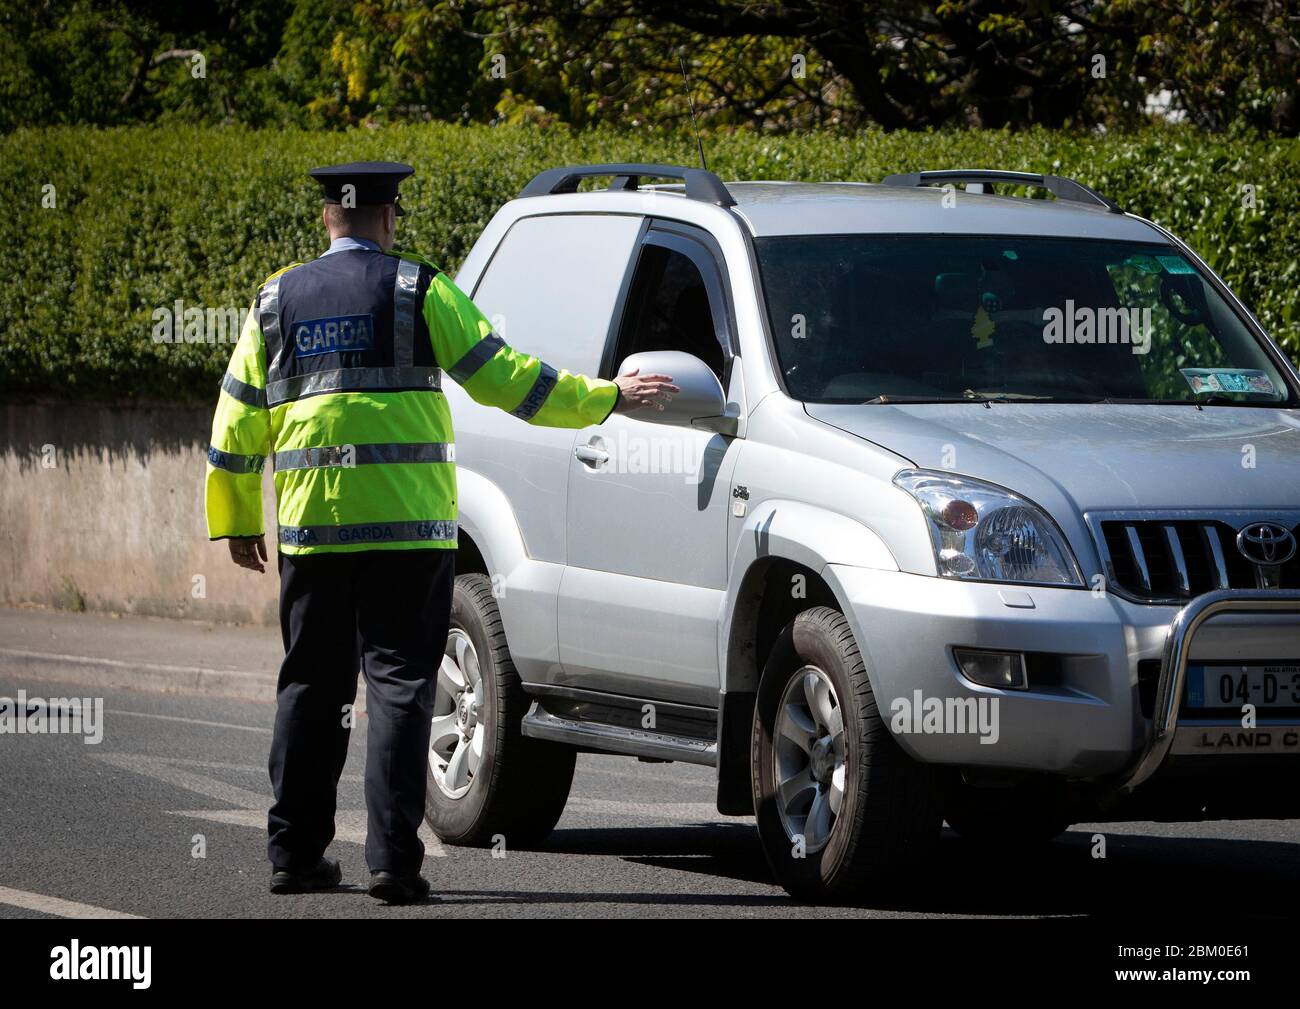 Dublin, Ireland - April 29, 2020: a Garda Covid-19 checkpoint at Sutton Cross just outside the city. Stock Photo